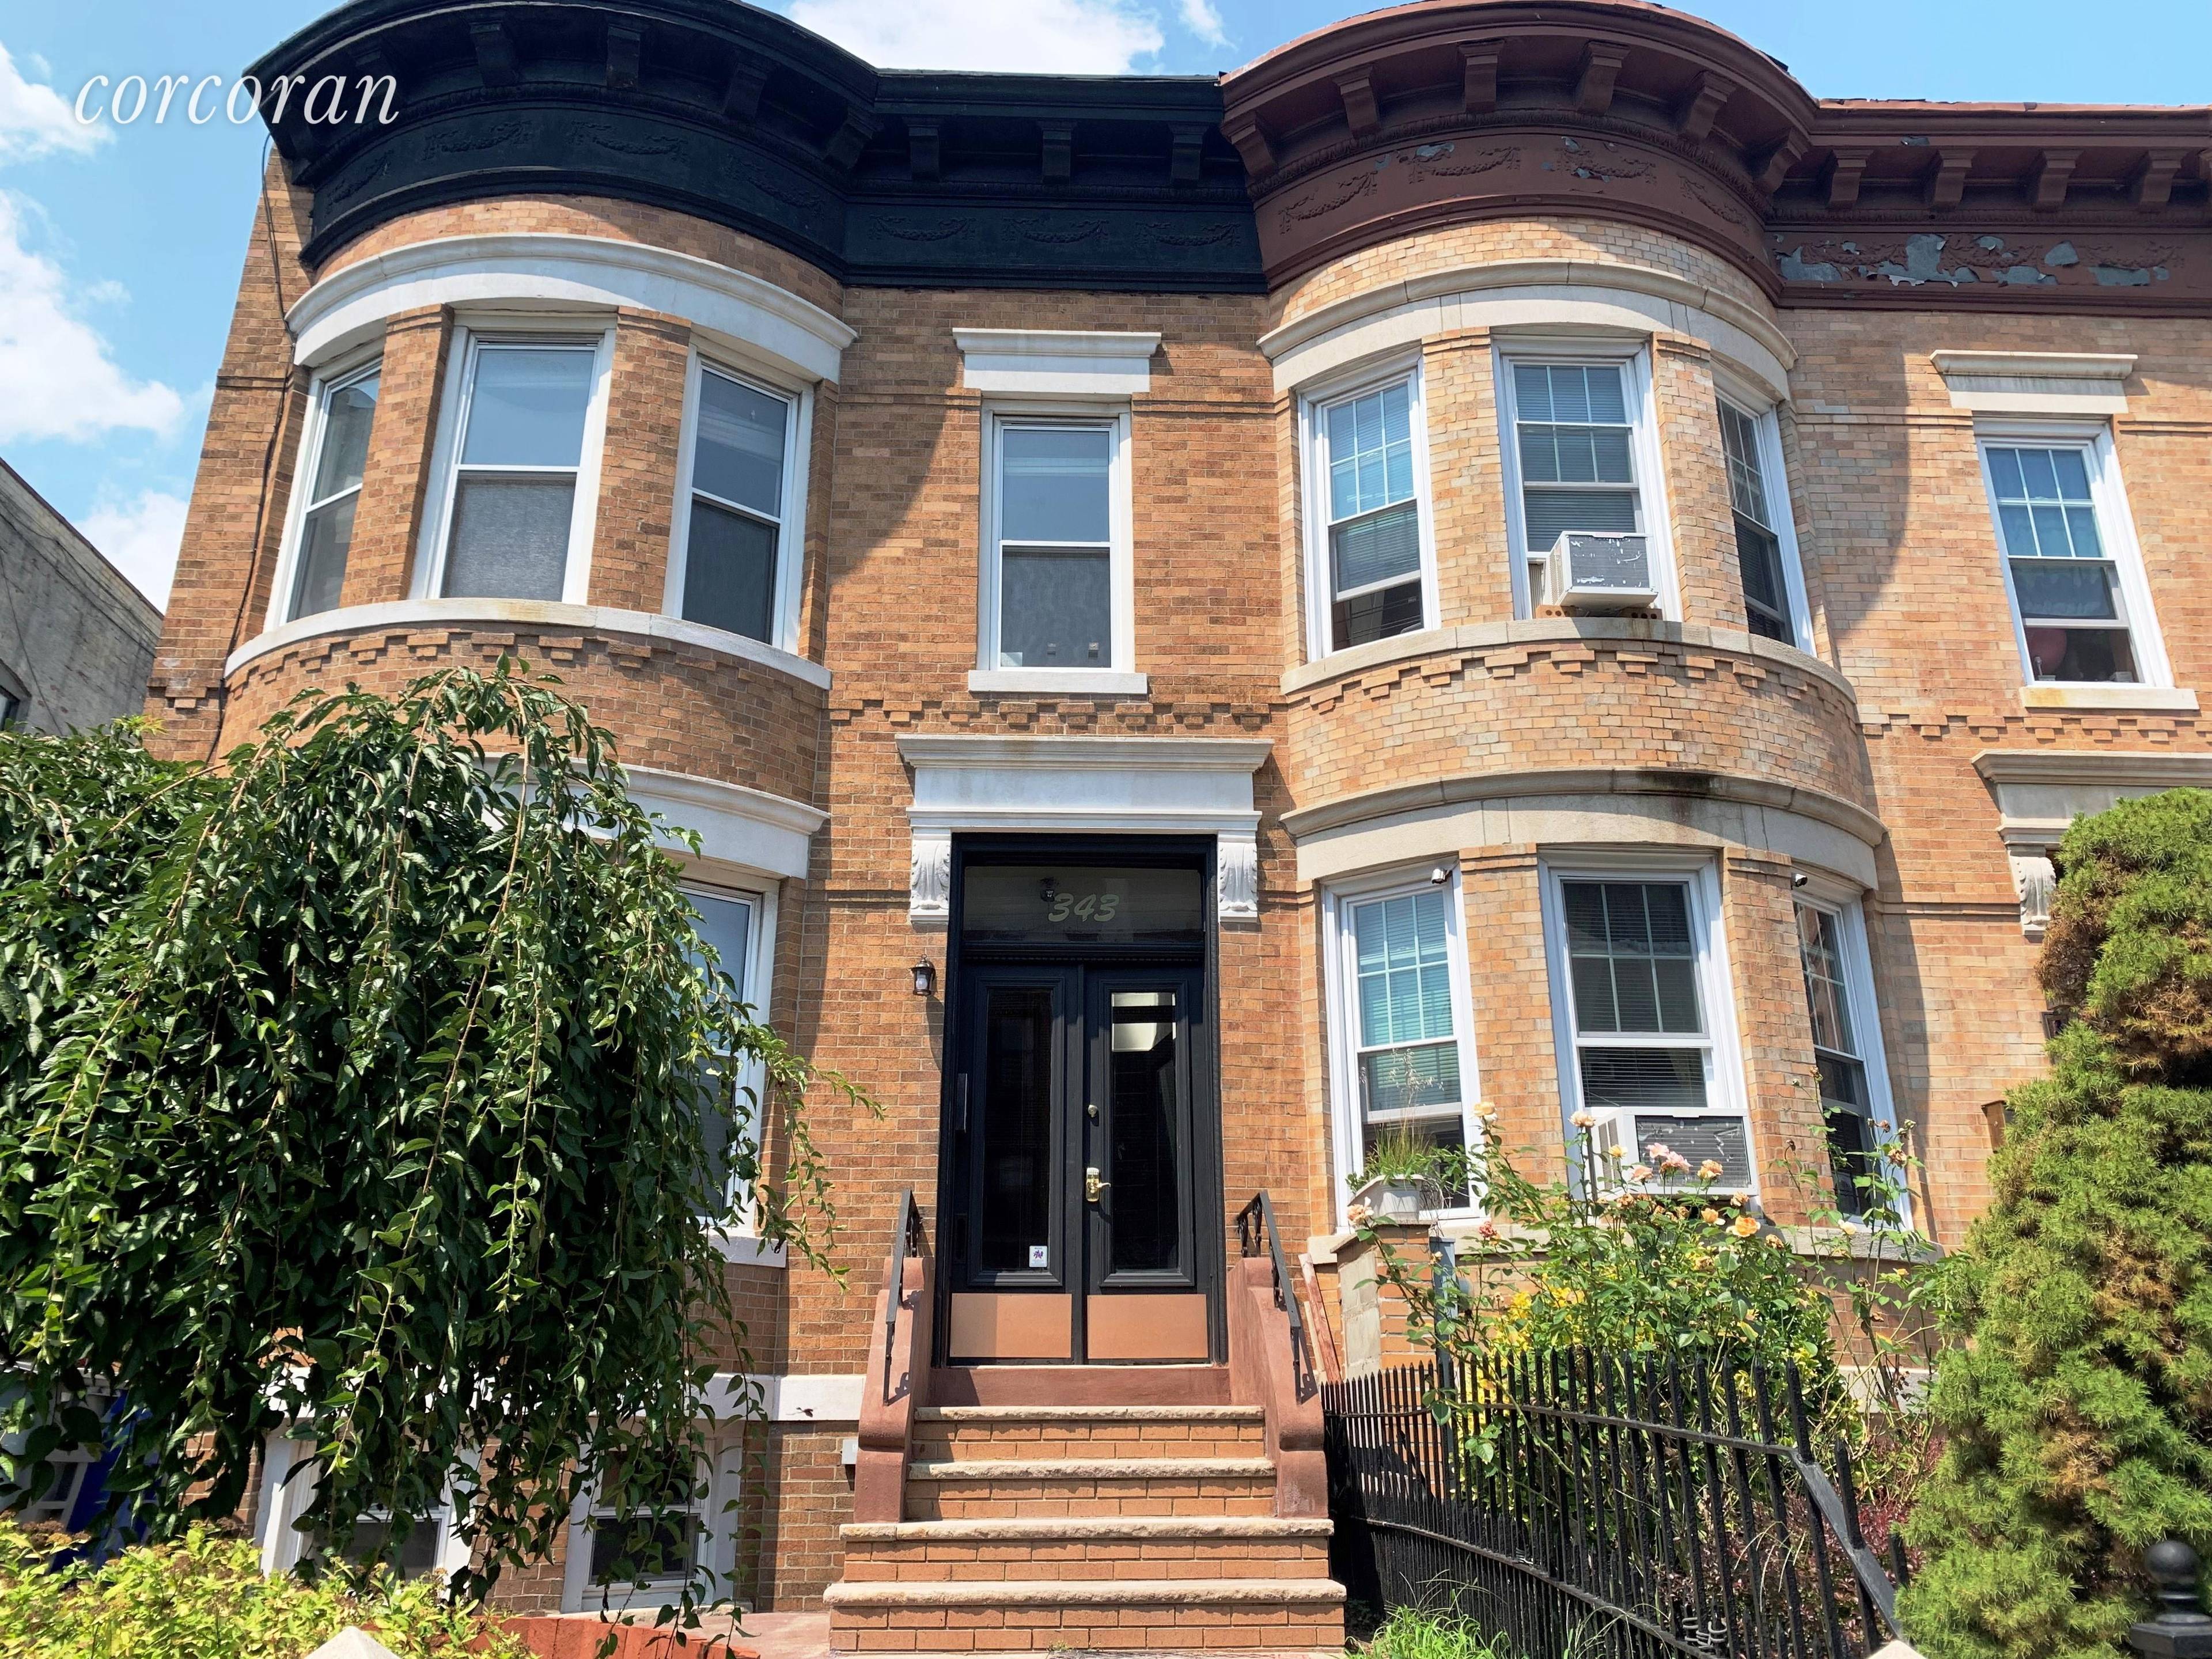 Beautifully renovated two family brick townhouse located on a prime block in Lefferts Gardens.